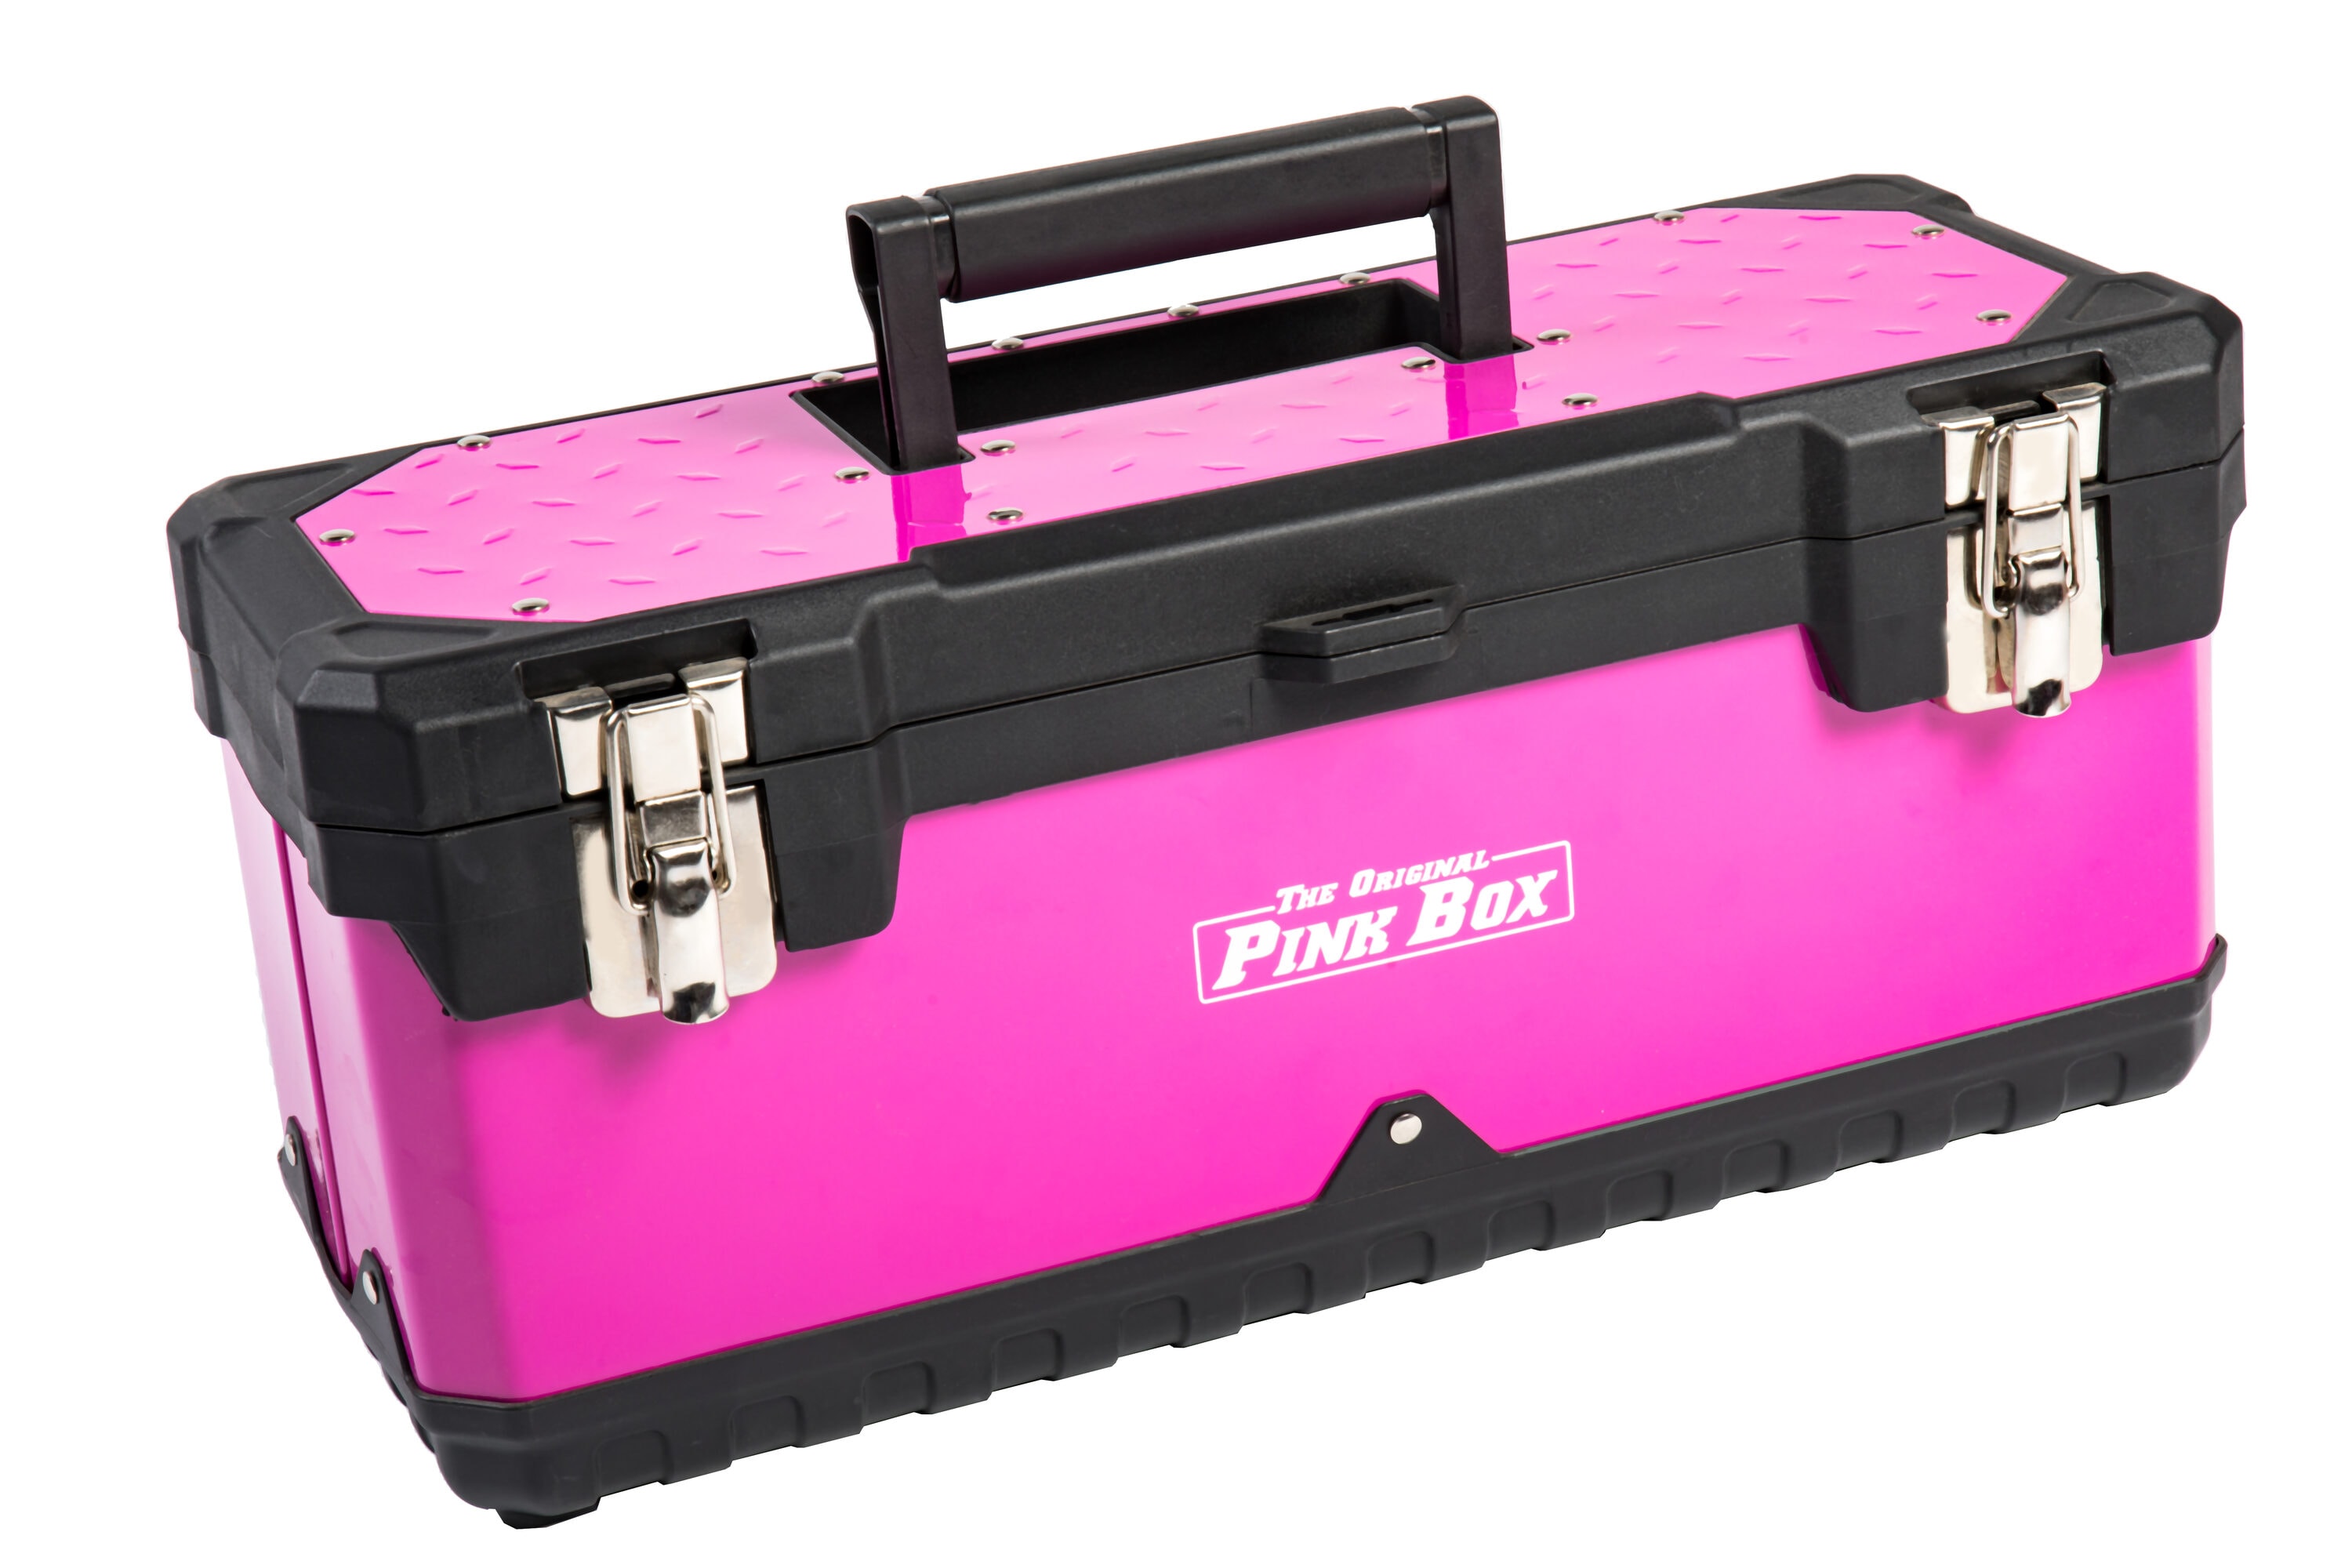 The Original Pink Box 19.7-in Pink Steel Lockable Tool Box in the